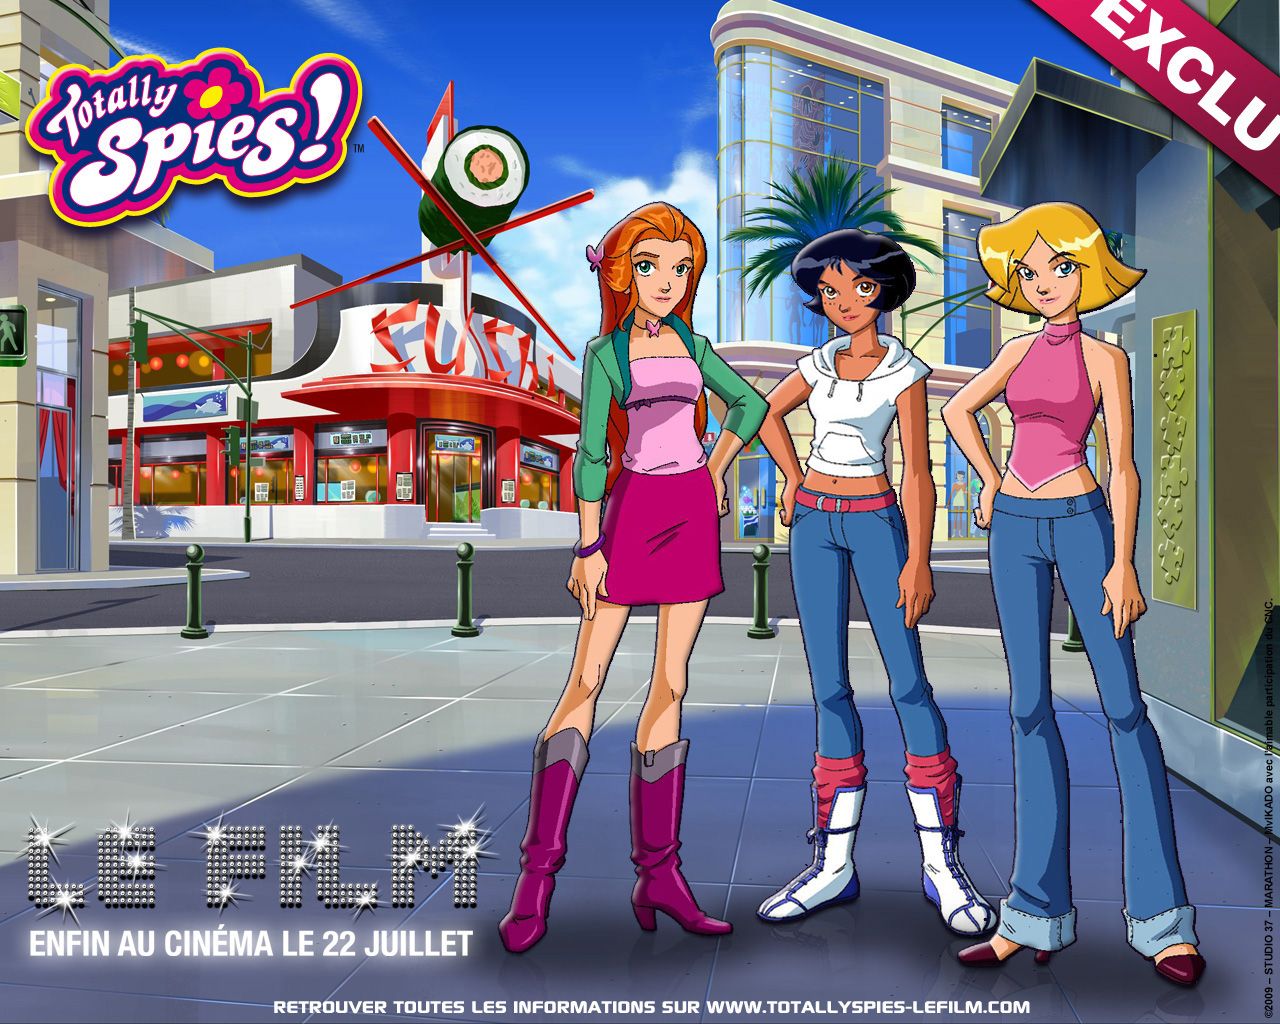 Wallpapers Totally Spies! Cartoons Image #184365 Download